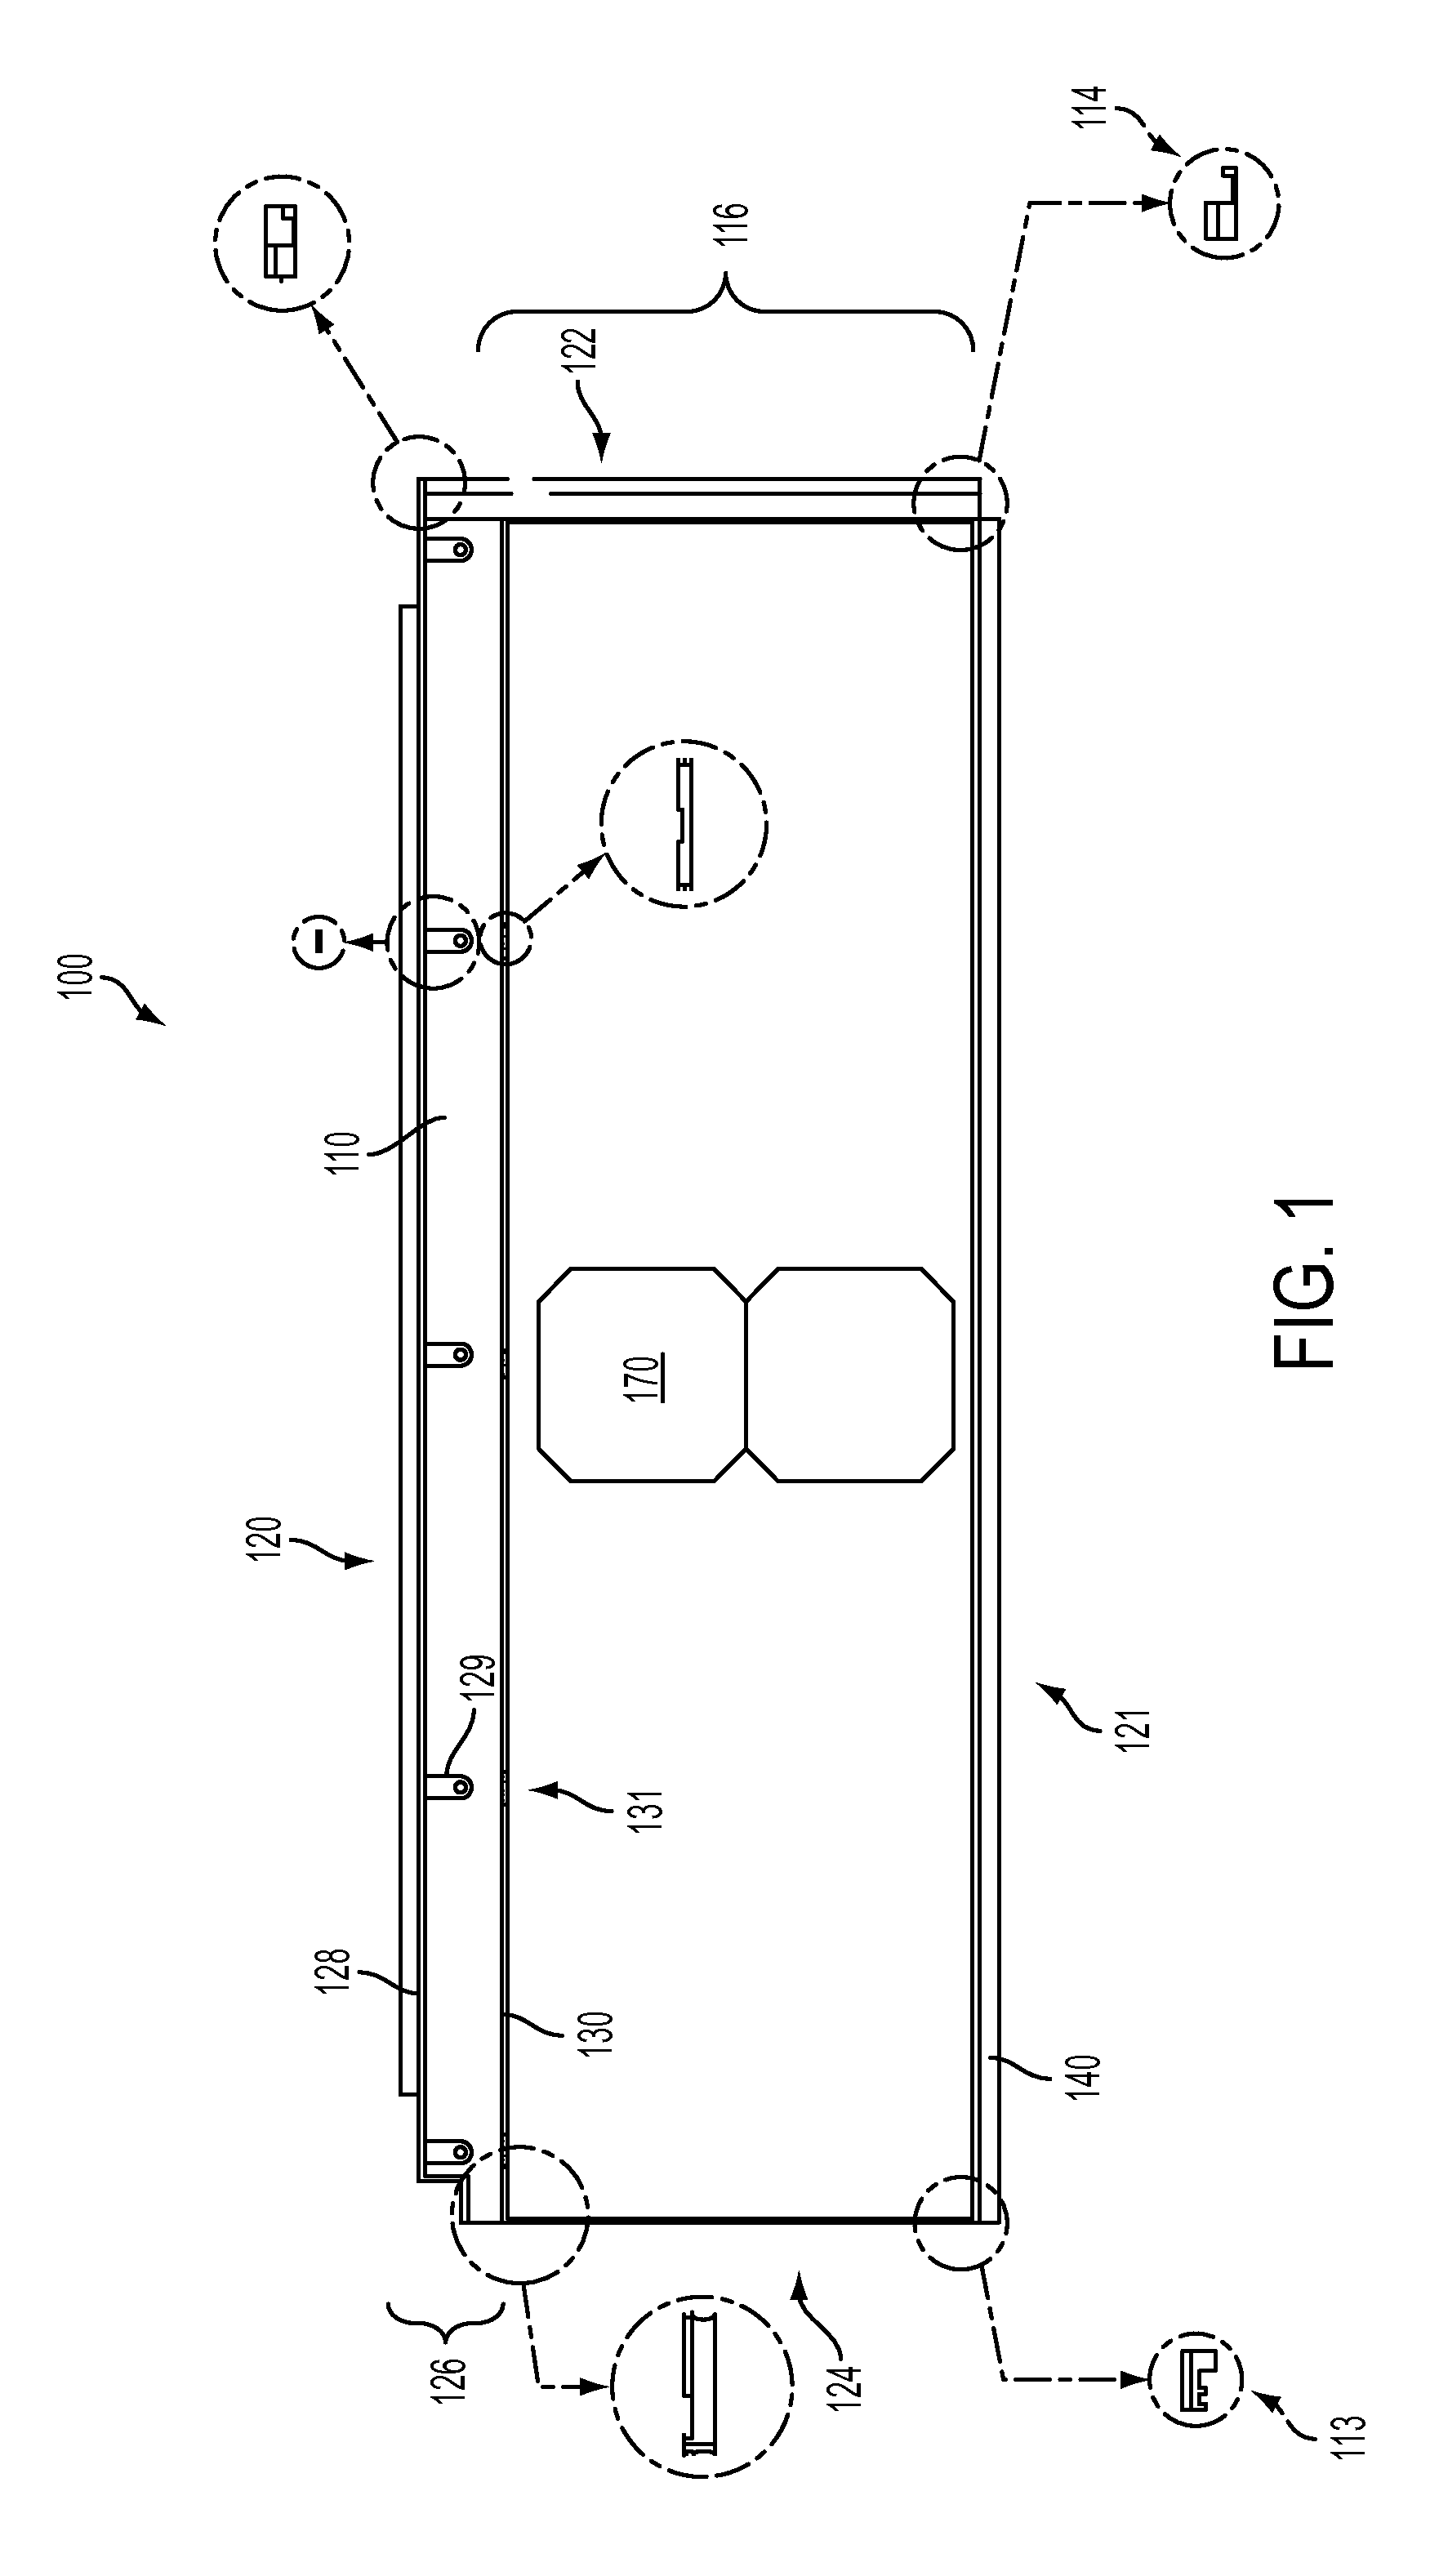 Roofing Product with Integrated Photovoltaic Elements and Flashing System